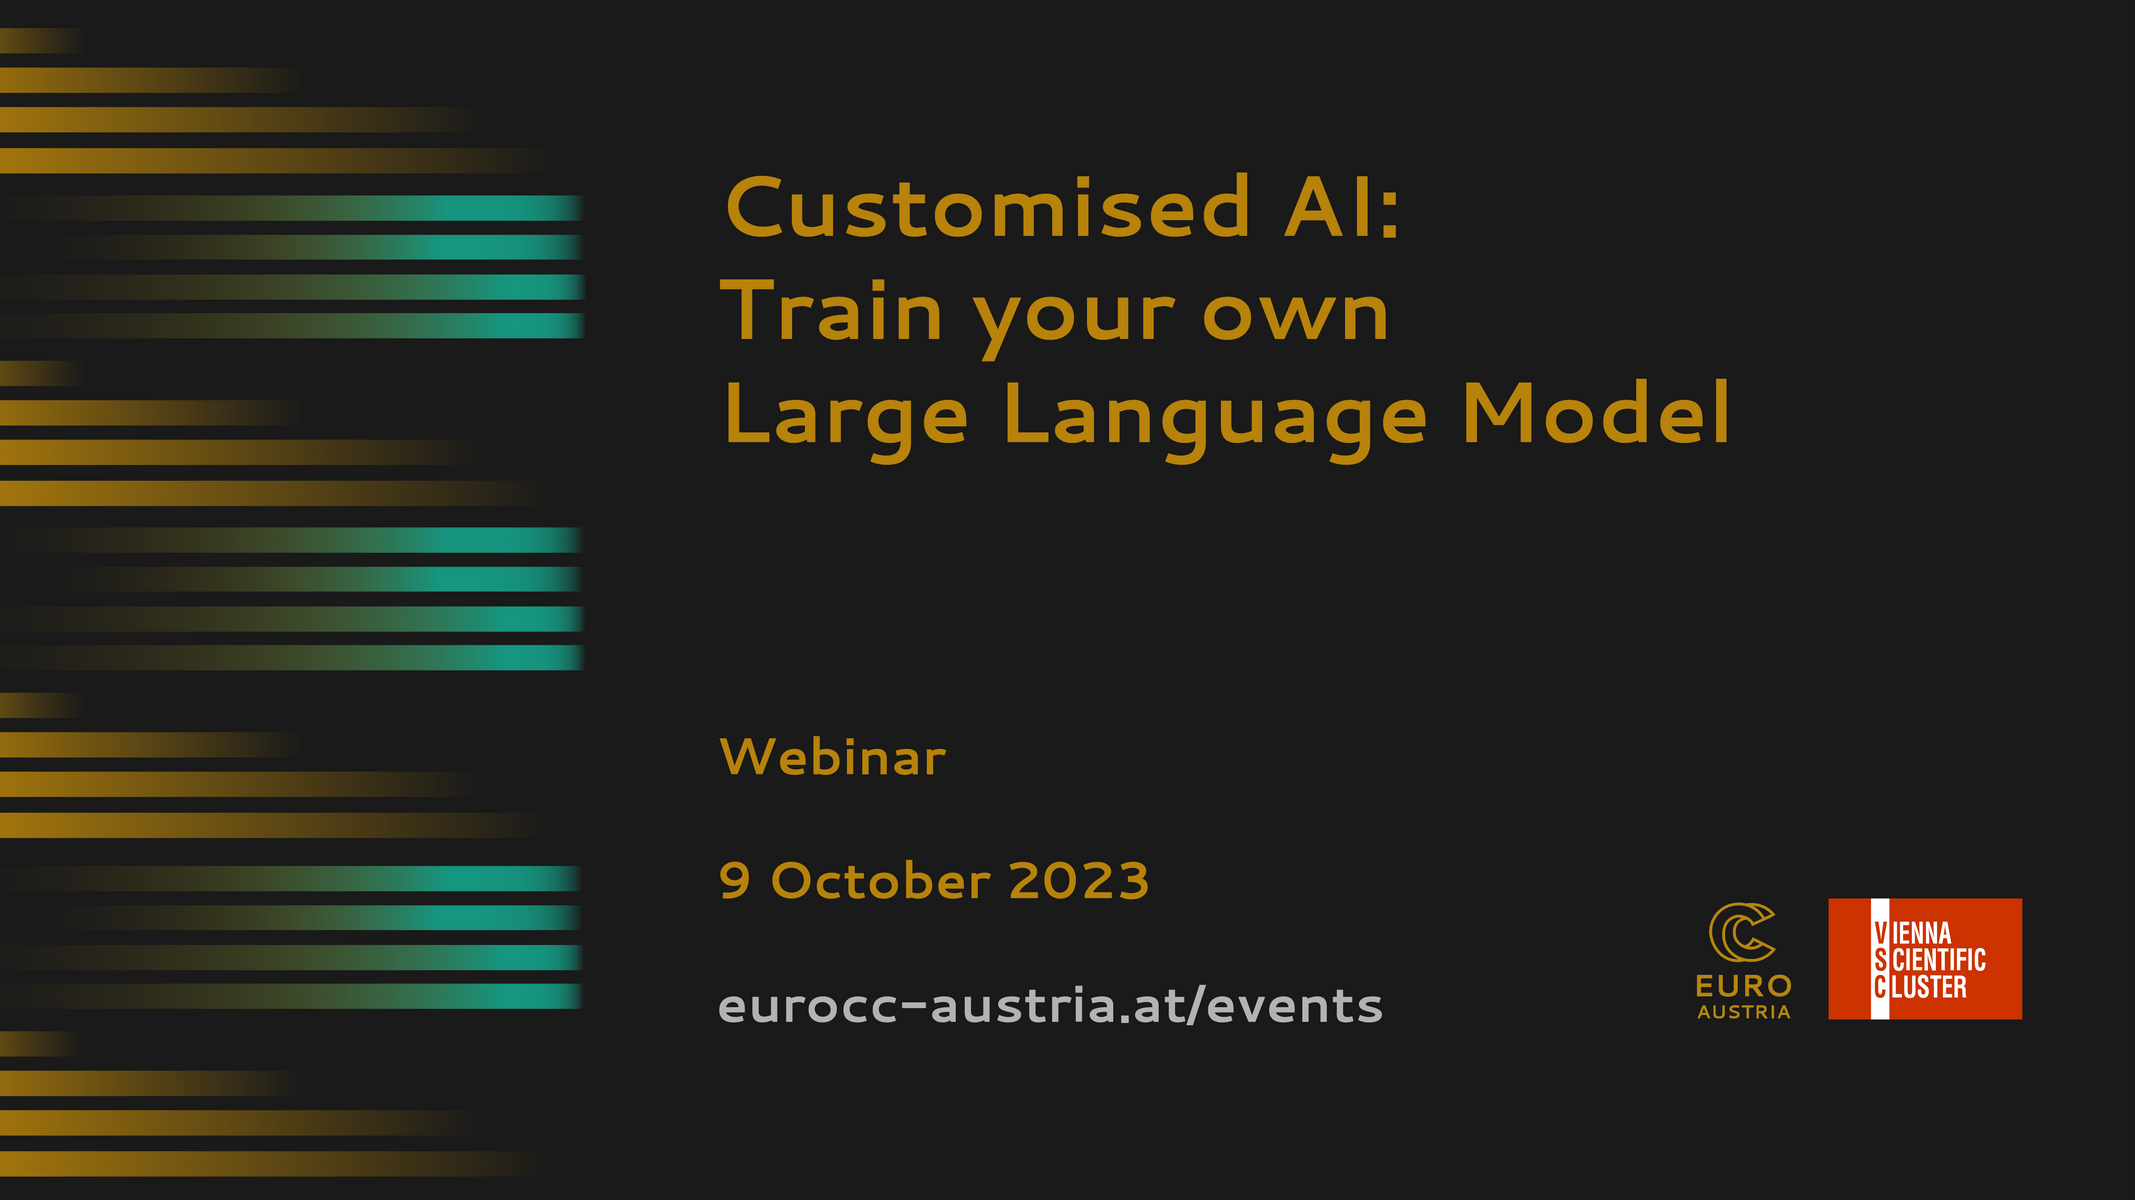 Webinar “Customised AI: Train your own large language model”  Event organized by NCC Austria, October 9th, online